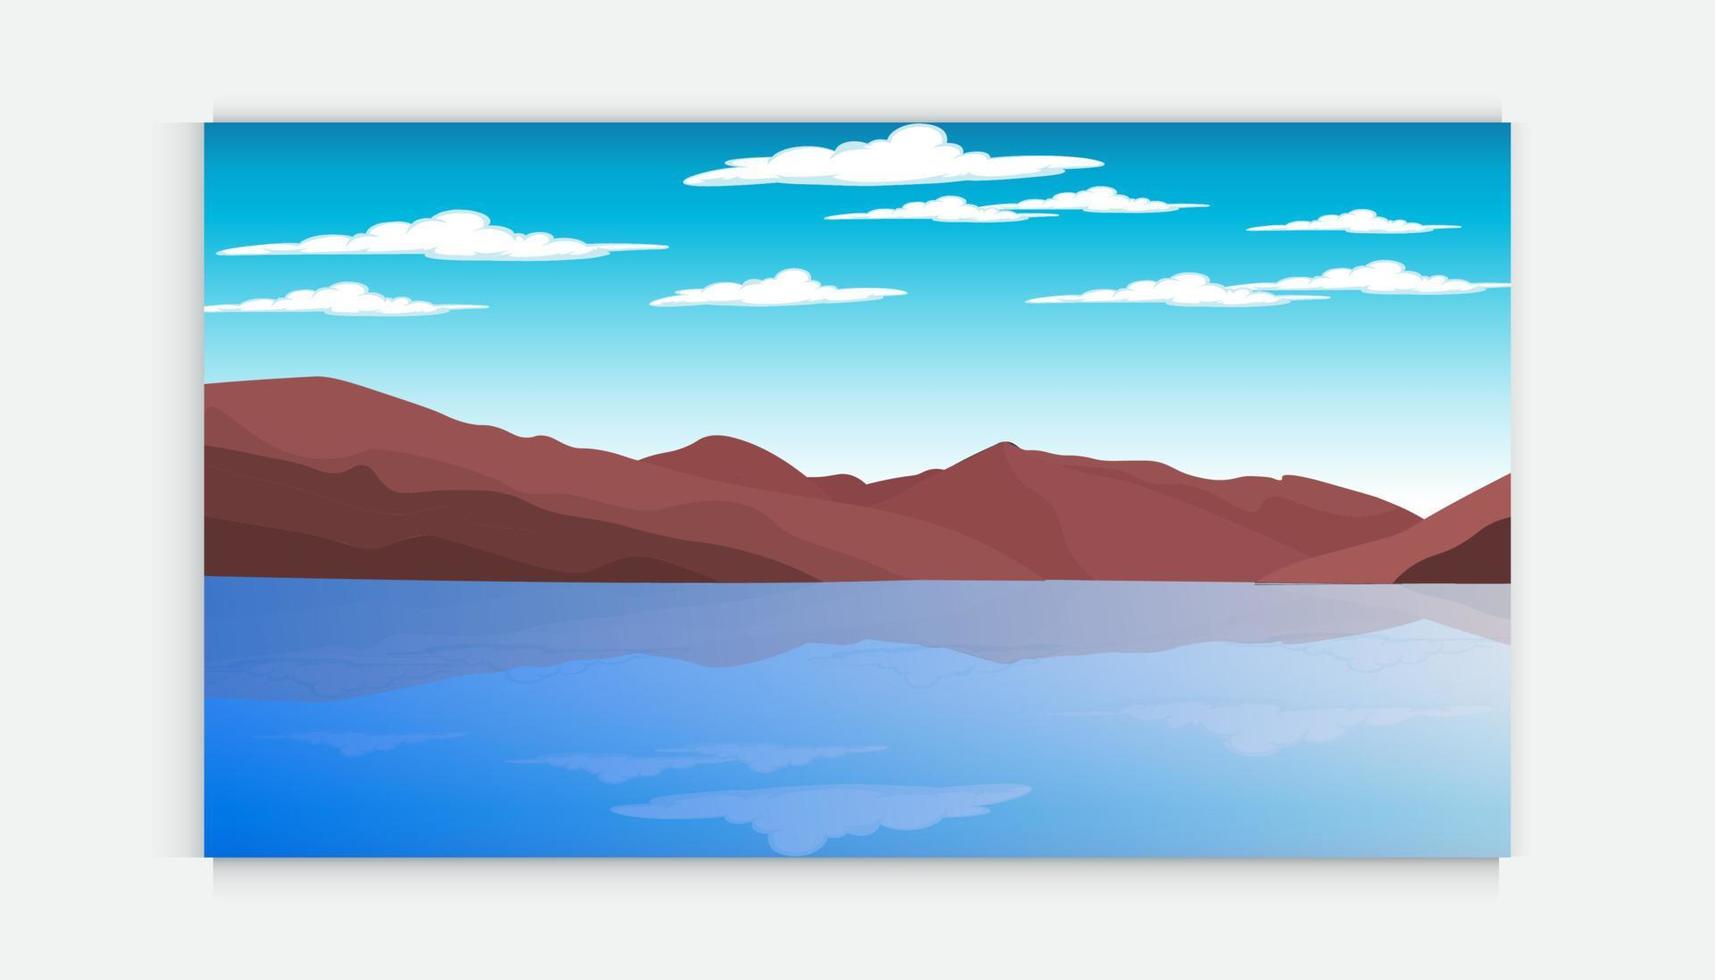 Mountain , Blue Sky reflecting on a lake water  beautiful landscape background , vector design illustration . Landscape, Illustrated with Hills or Mountains, Lake Water,, Blue Background. Nature